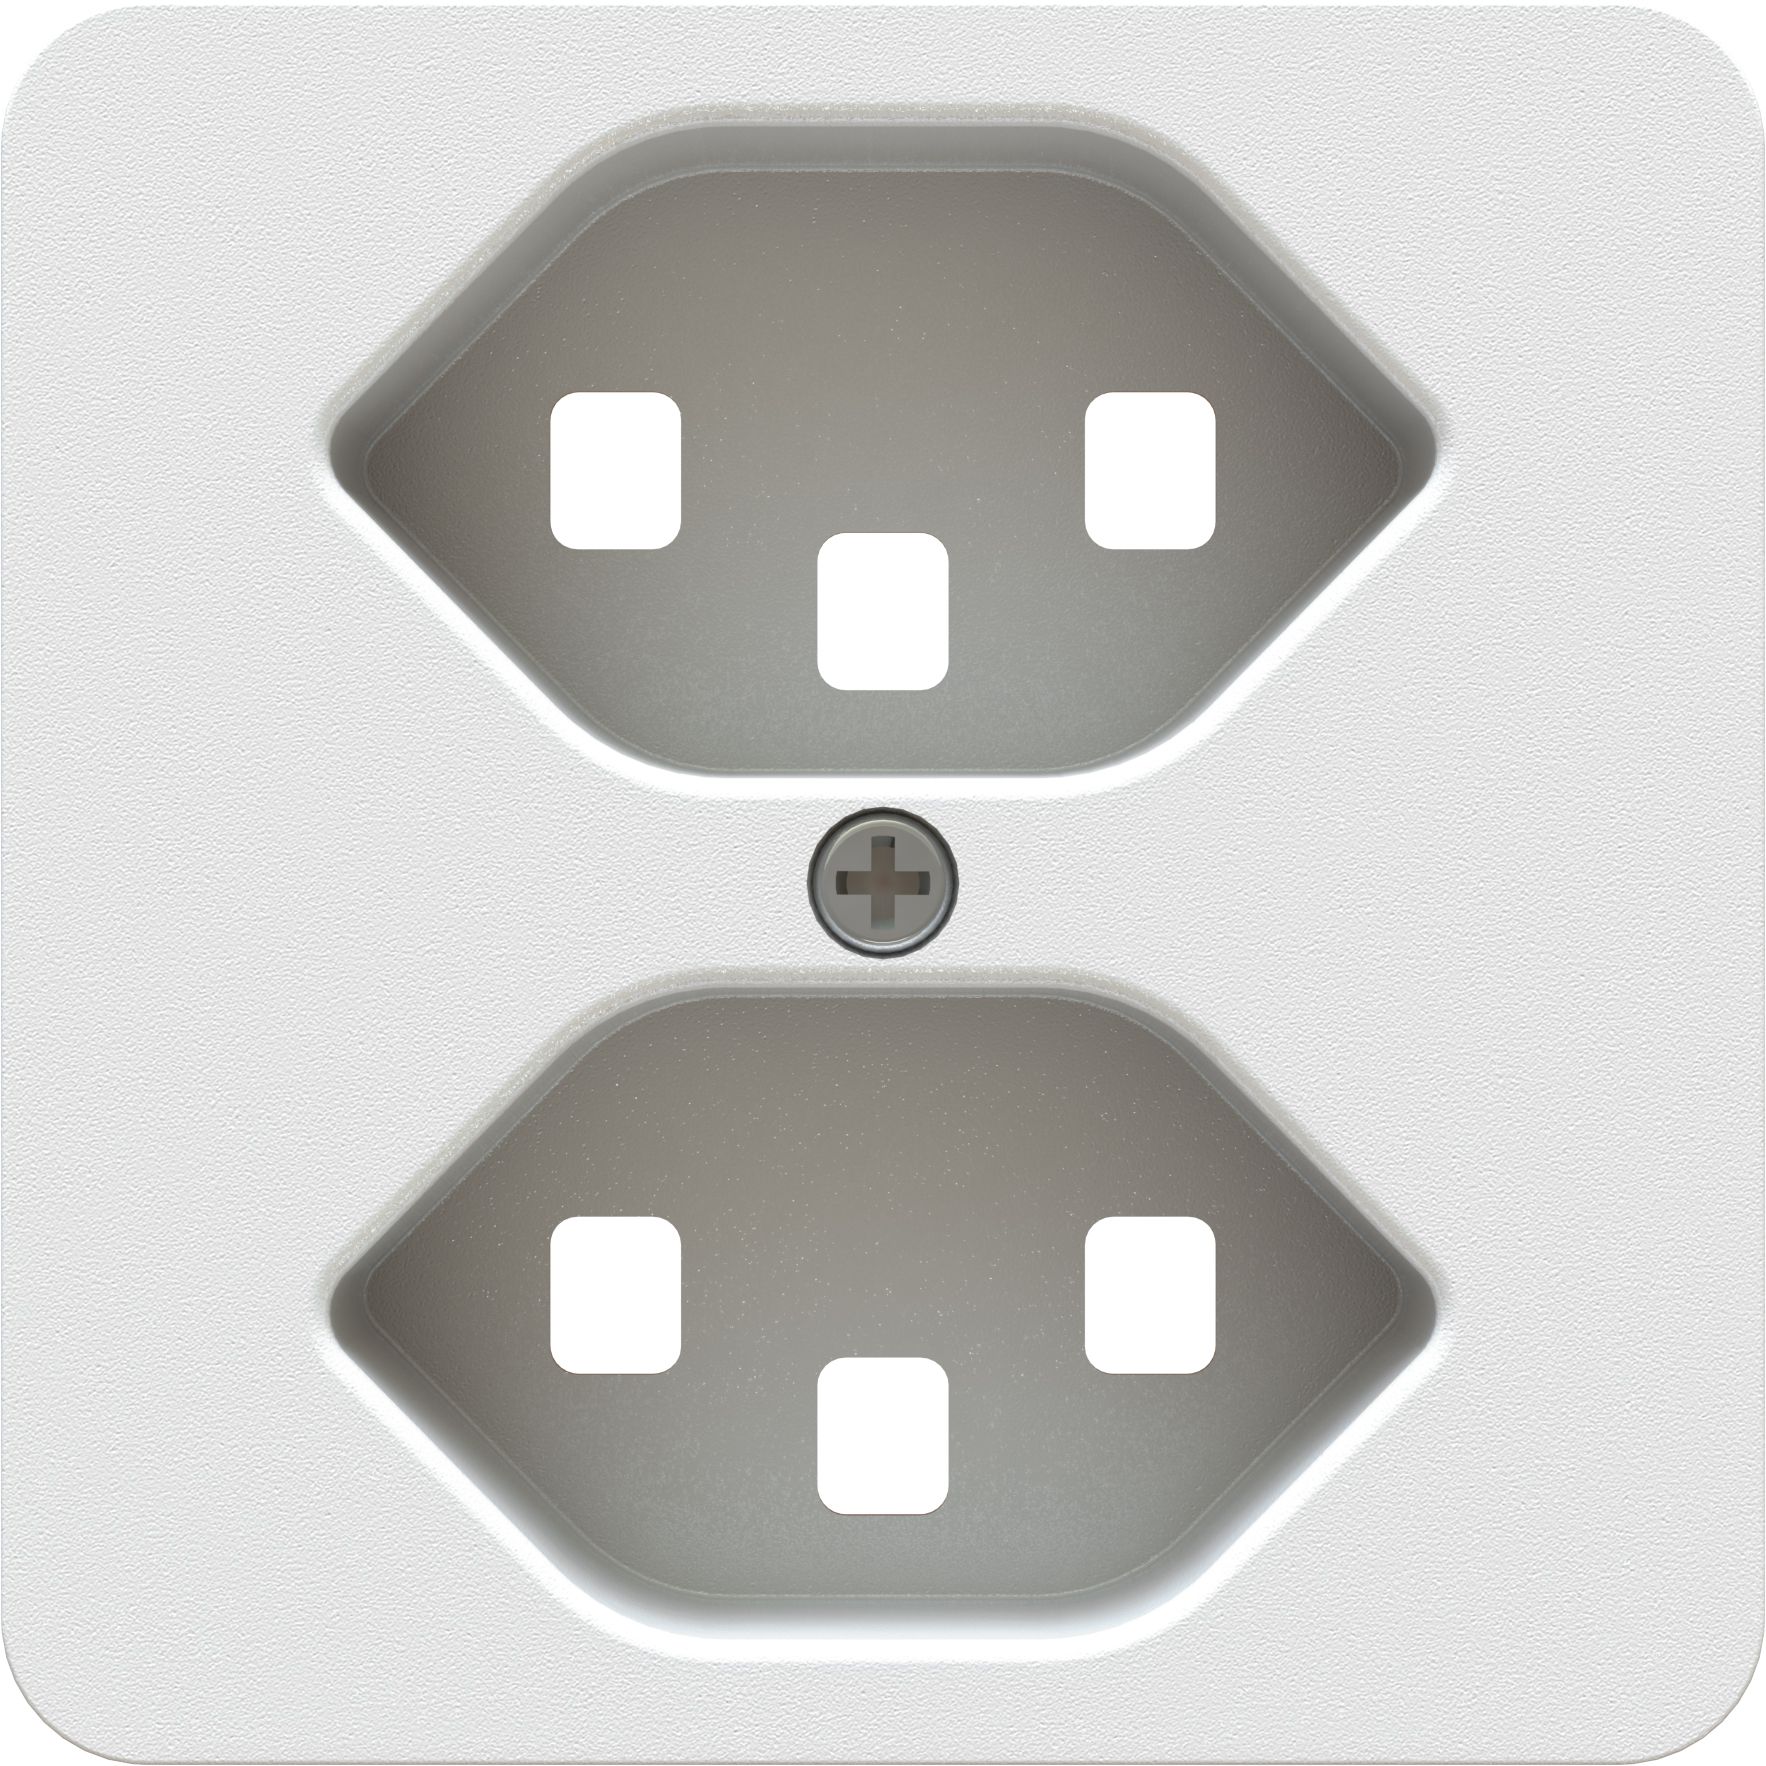 Central plate to wall socket 2x type 23 priamos white